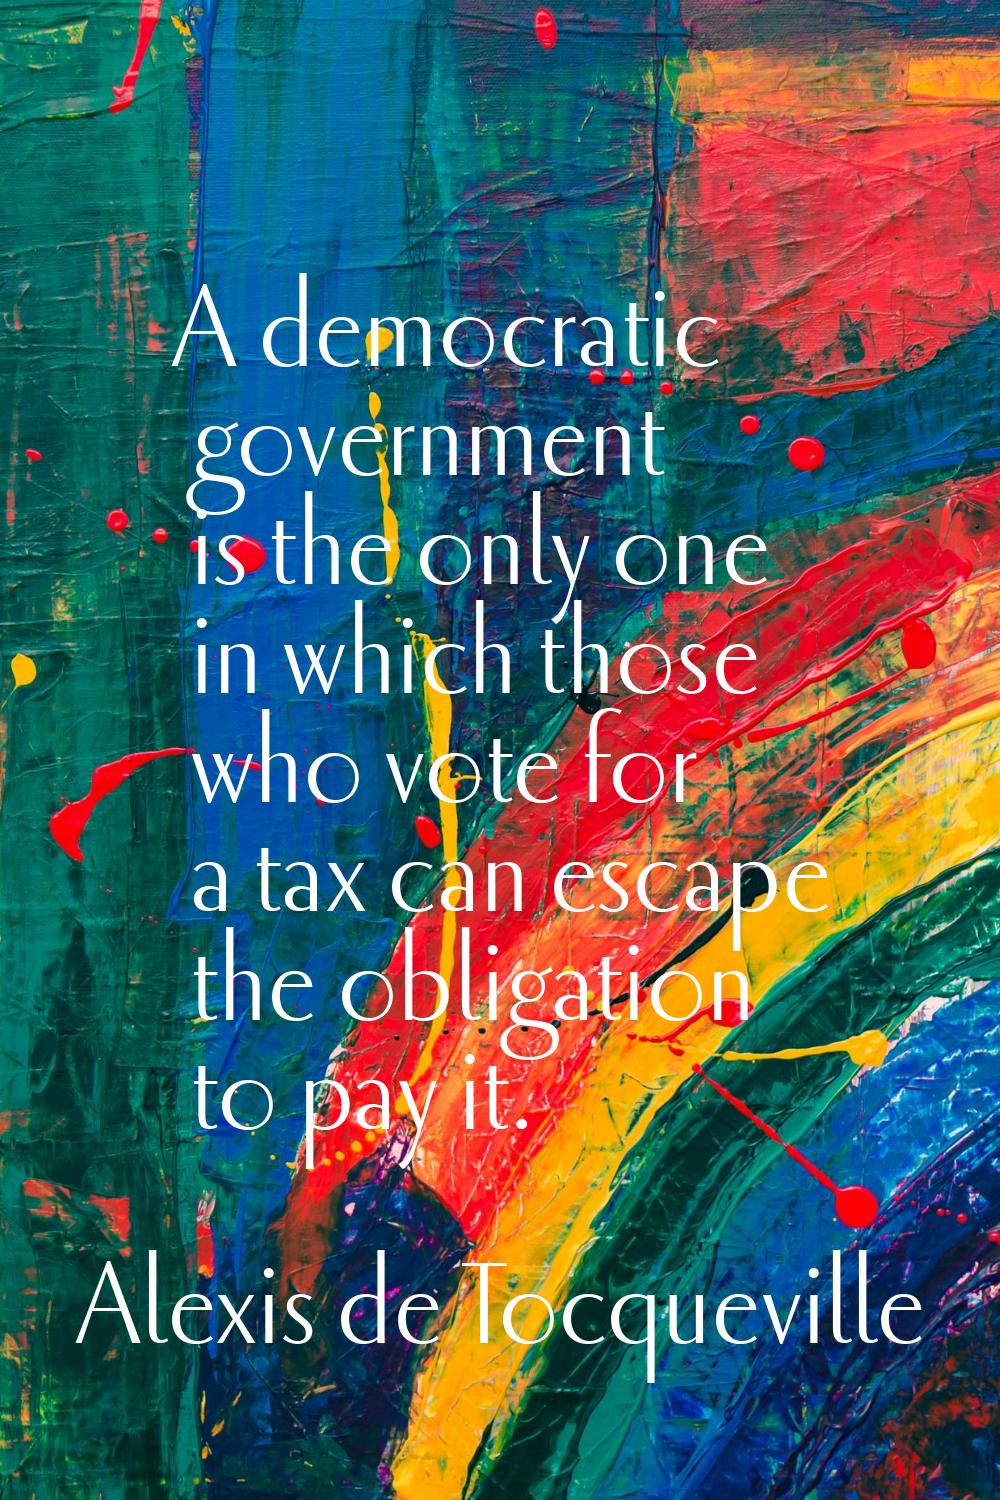 A democratic government is the only one in which those who vote for a tax can escape the obligation